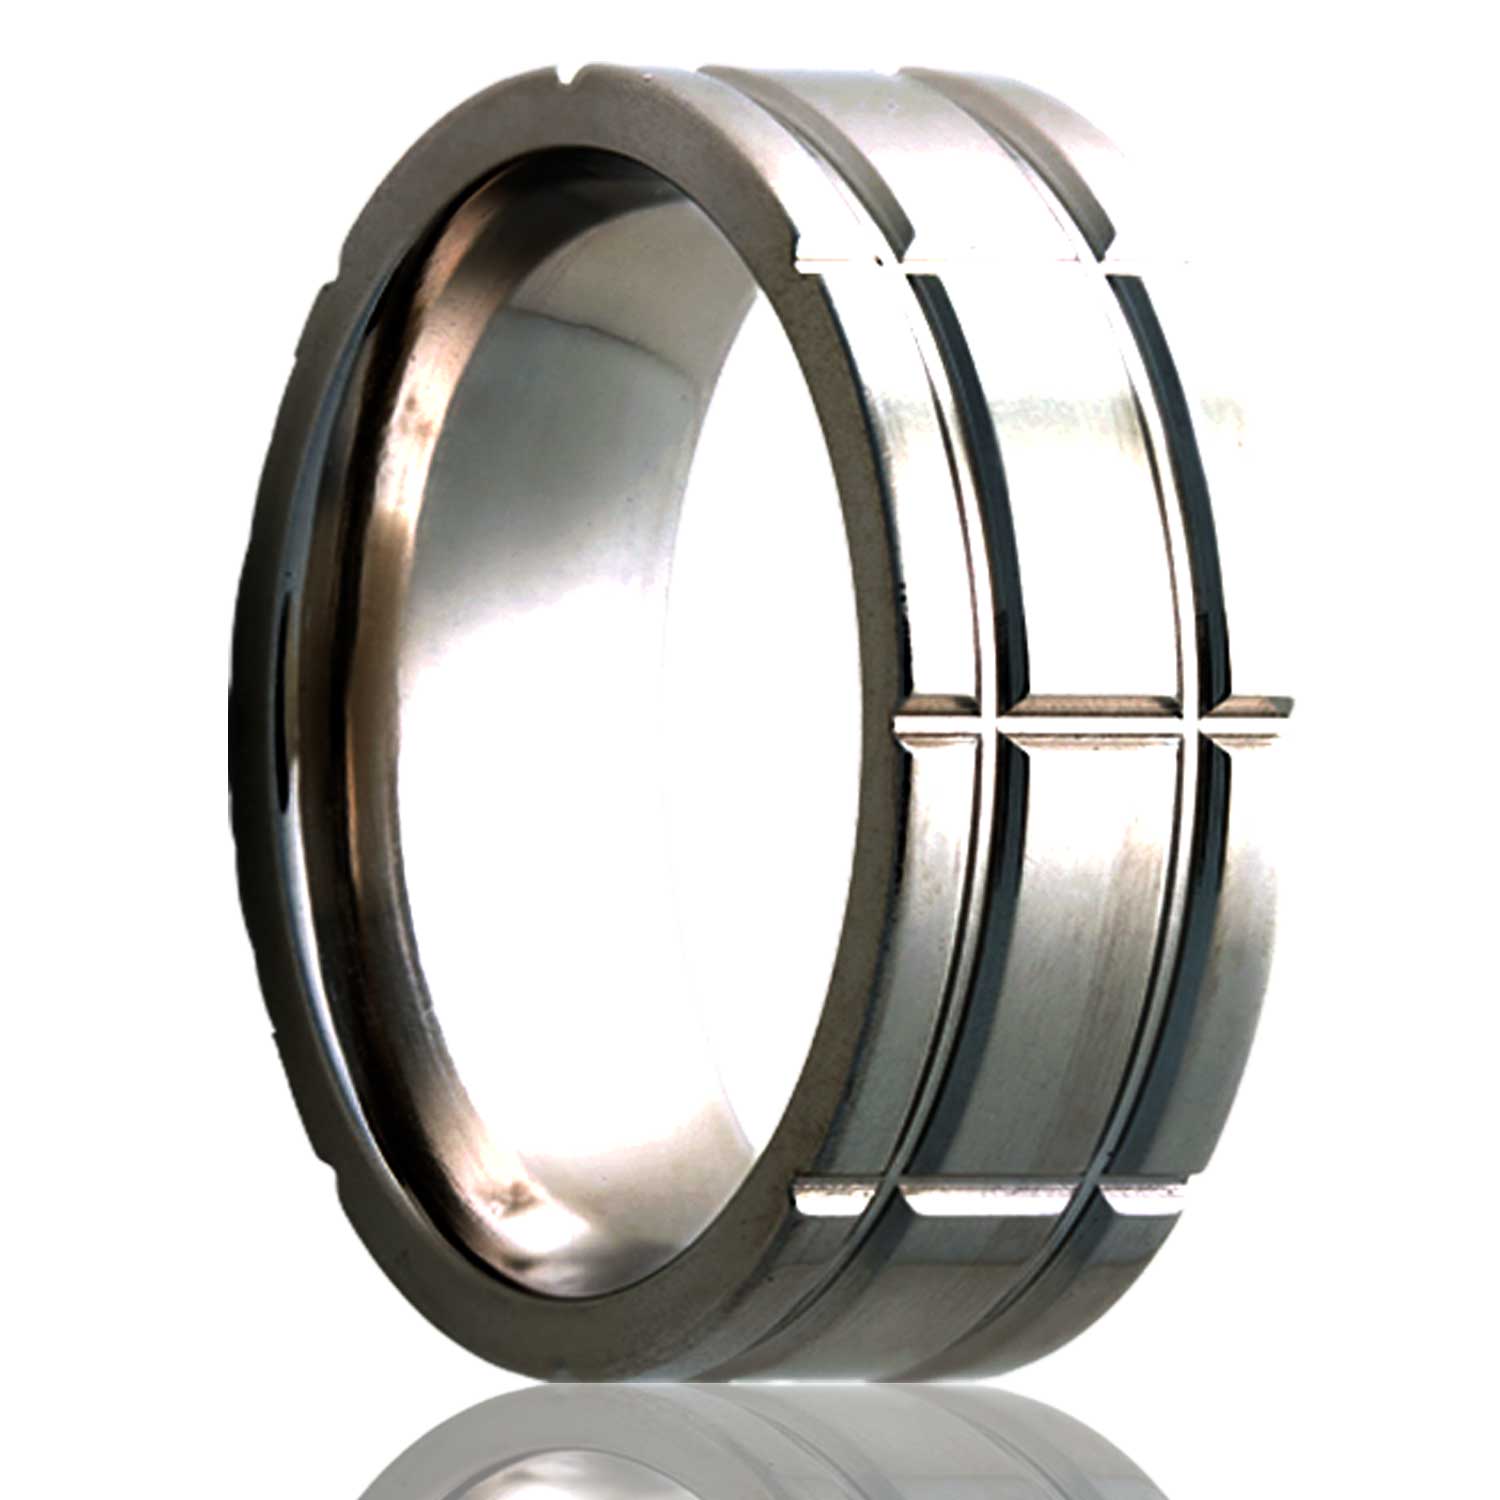 A intersecting groove pattern cobalt wedding band displayed on a neutral white background.